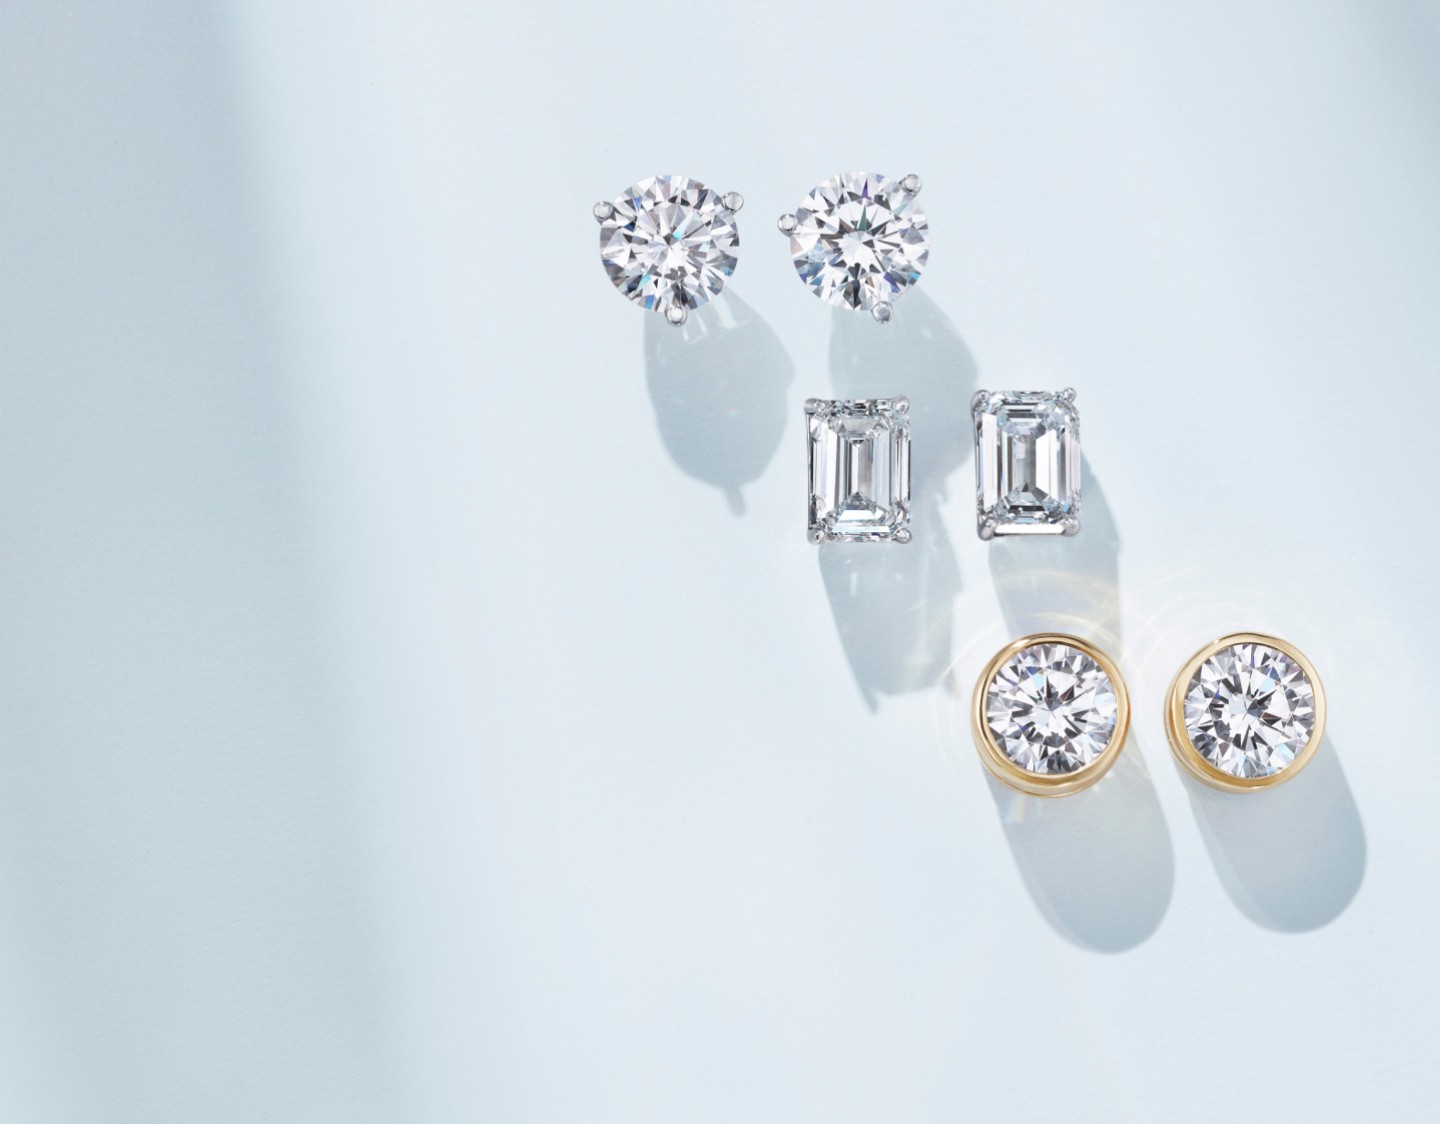 Assortment of diamond earrings in a variety of settings